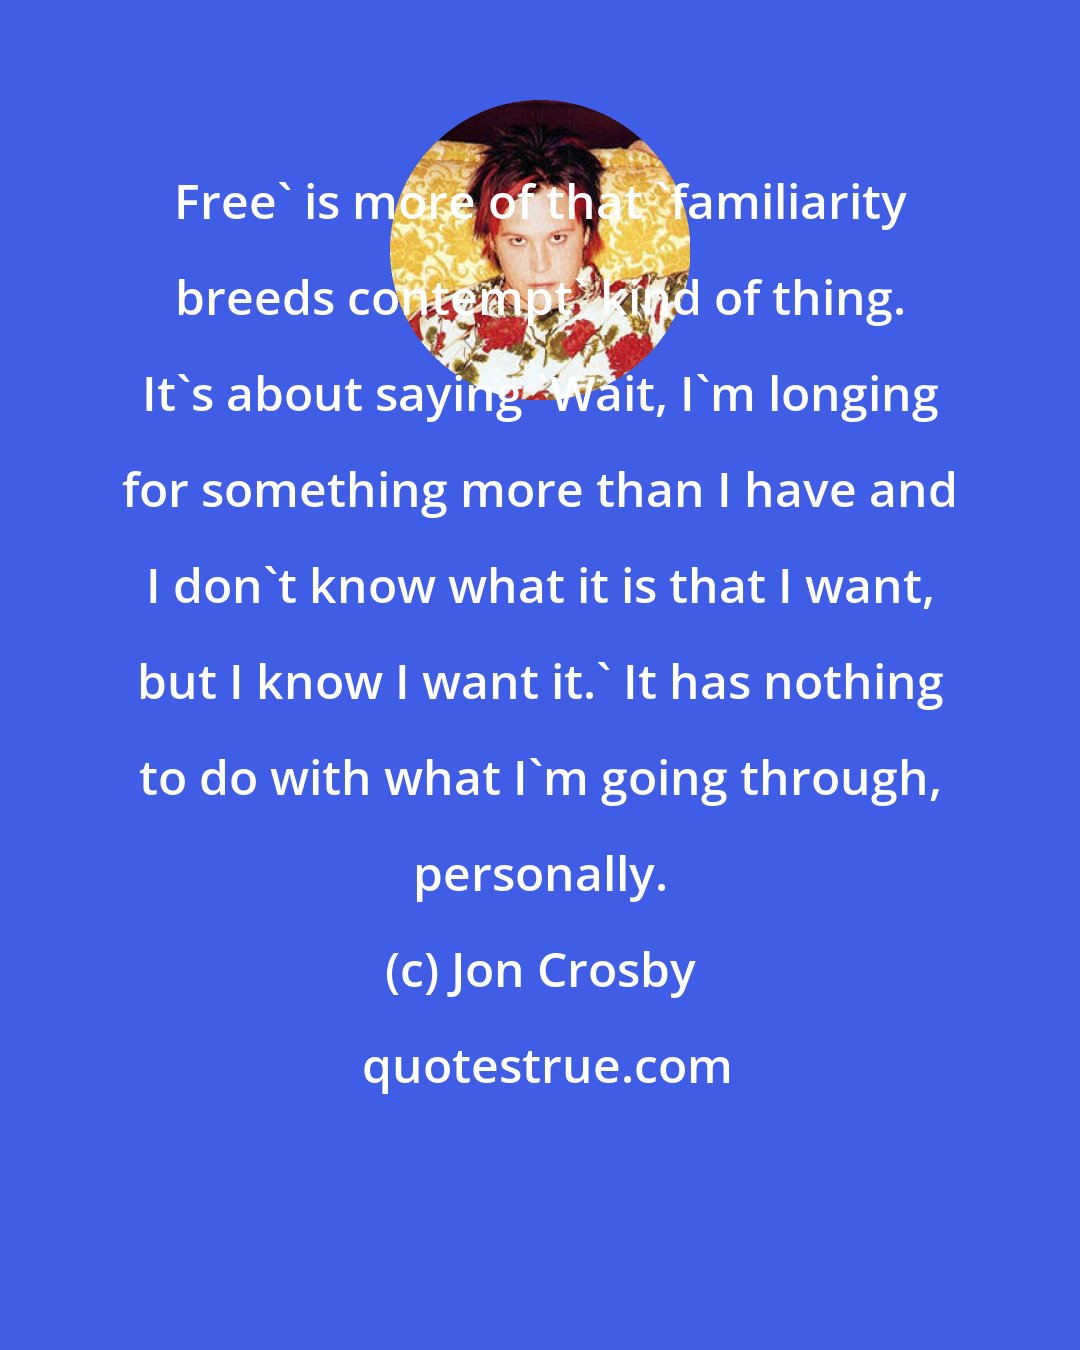 Jon Crosby: Free' is more of that 'familiarity breeds contempt' kind of thing. It's about saying 'Wait, I'm longing for something more than I have and I don't know what it is that I want, but I know I want it.' It has nothing to do with what I'm going through, personally.